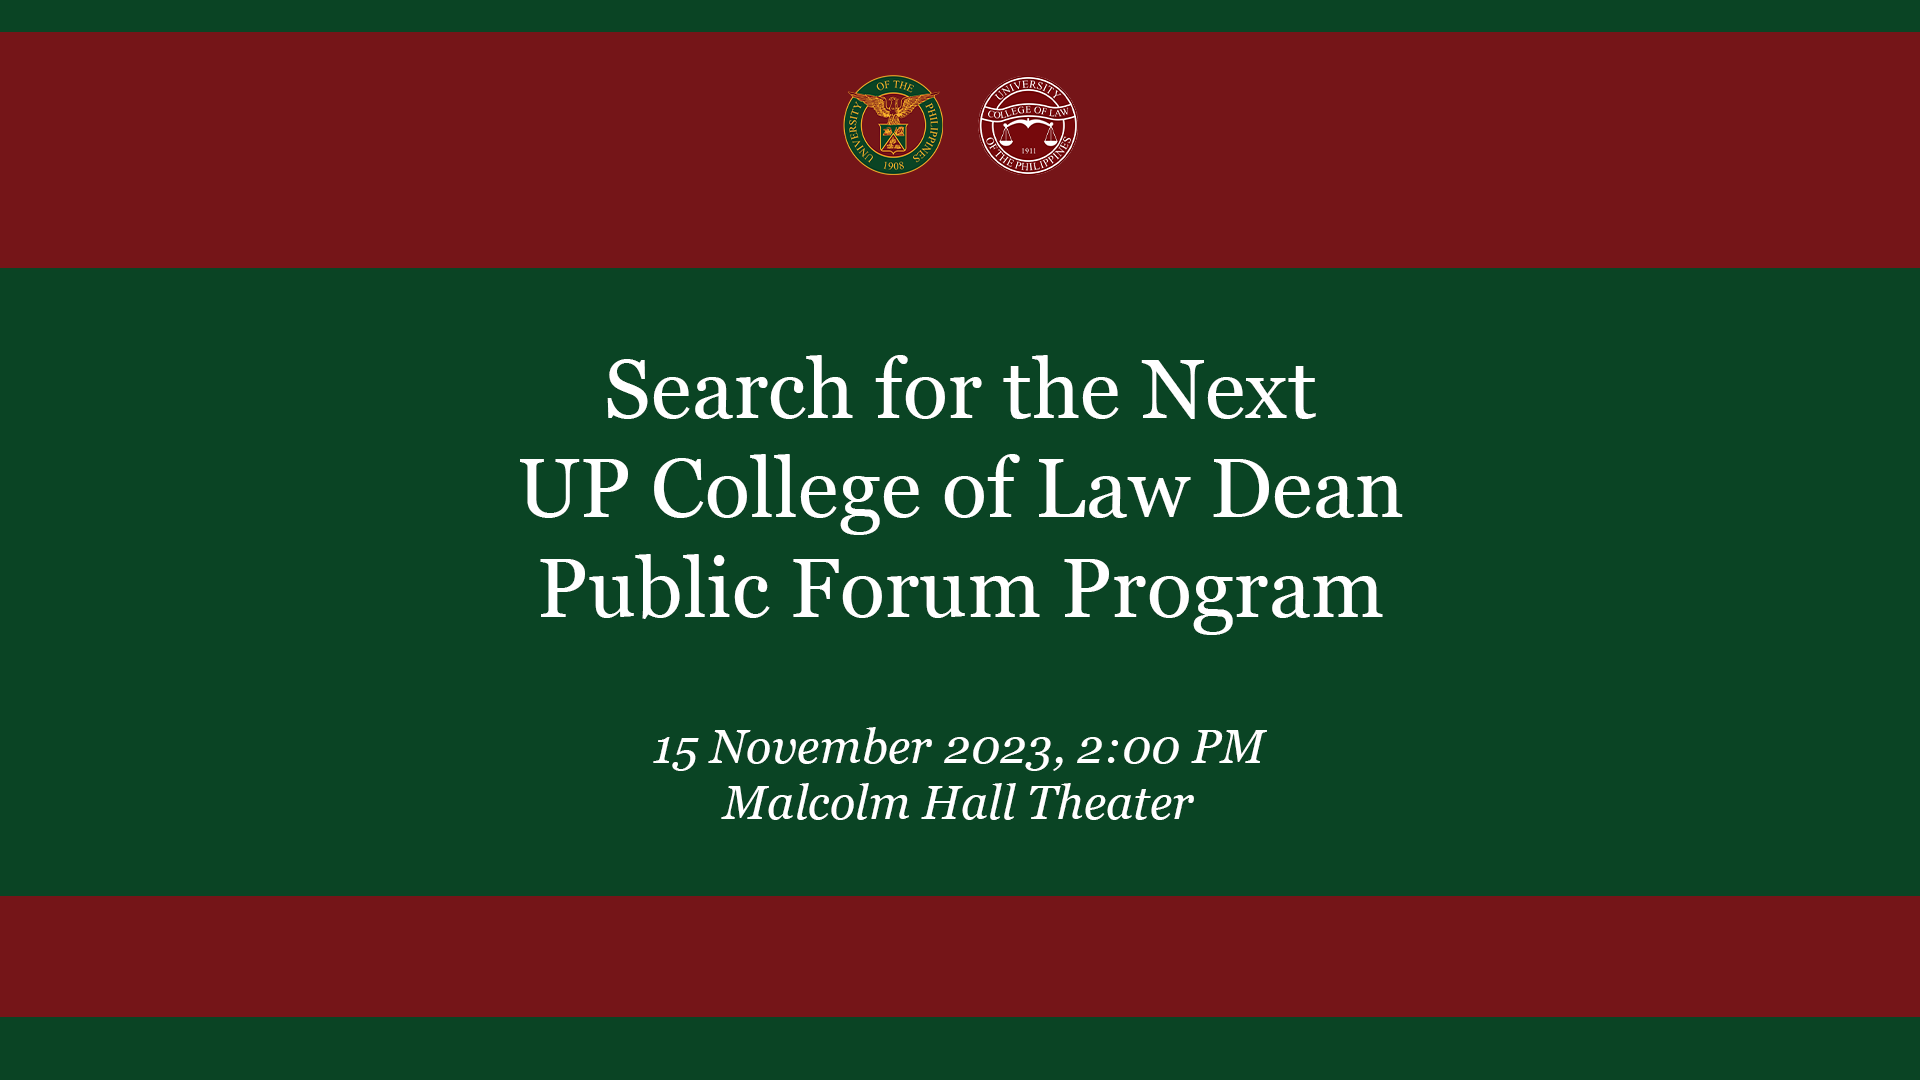 Search for the Next UP College of Law Dean